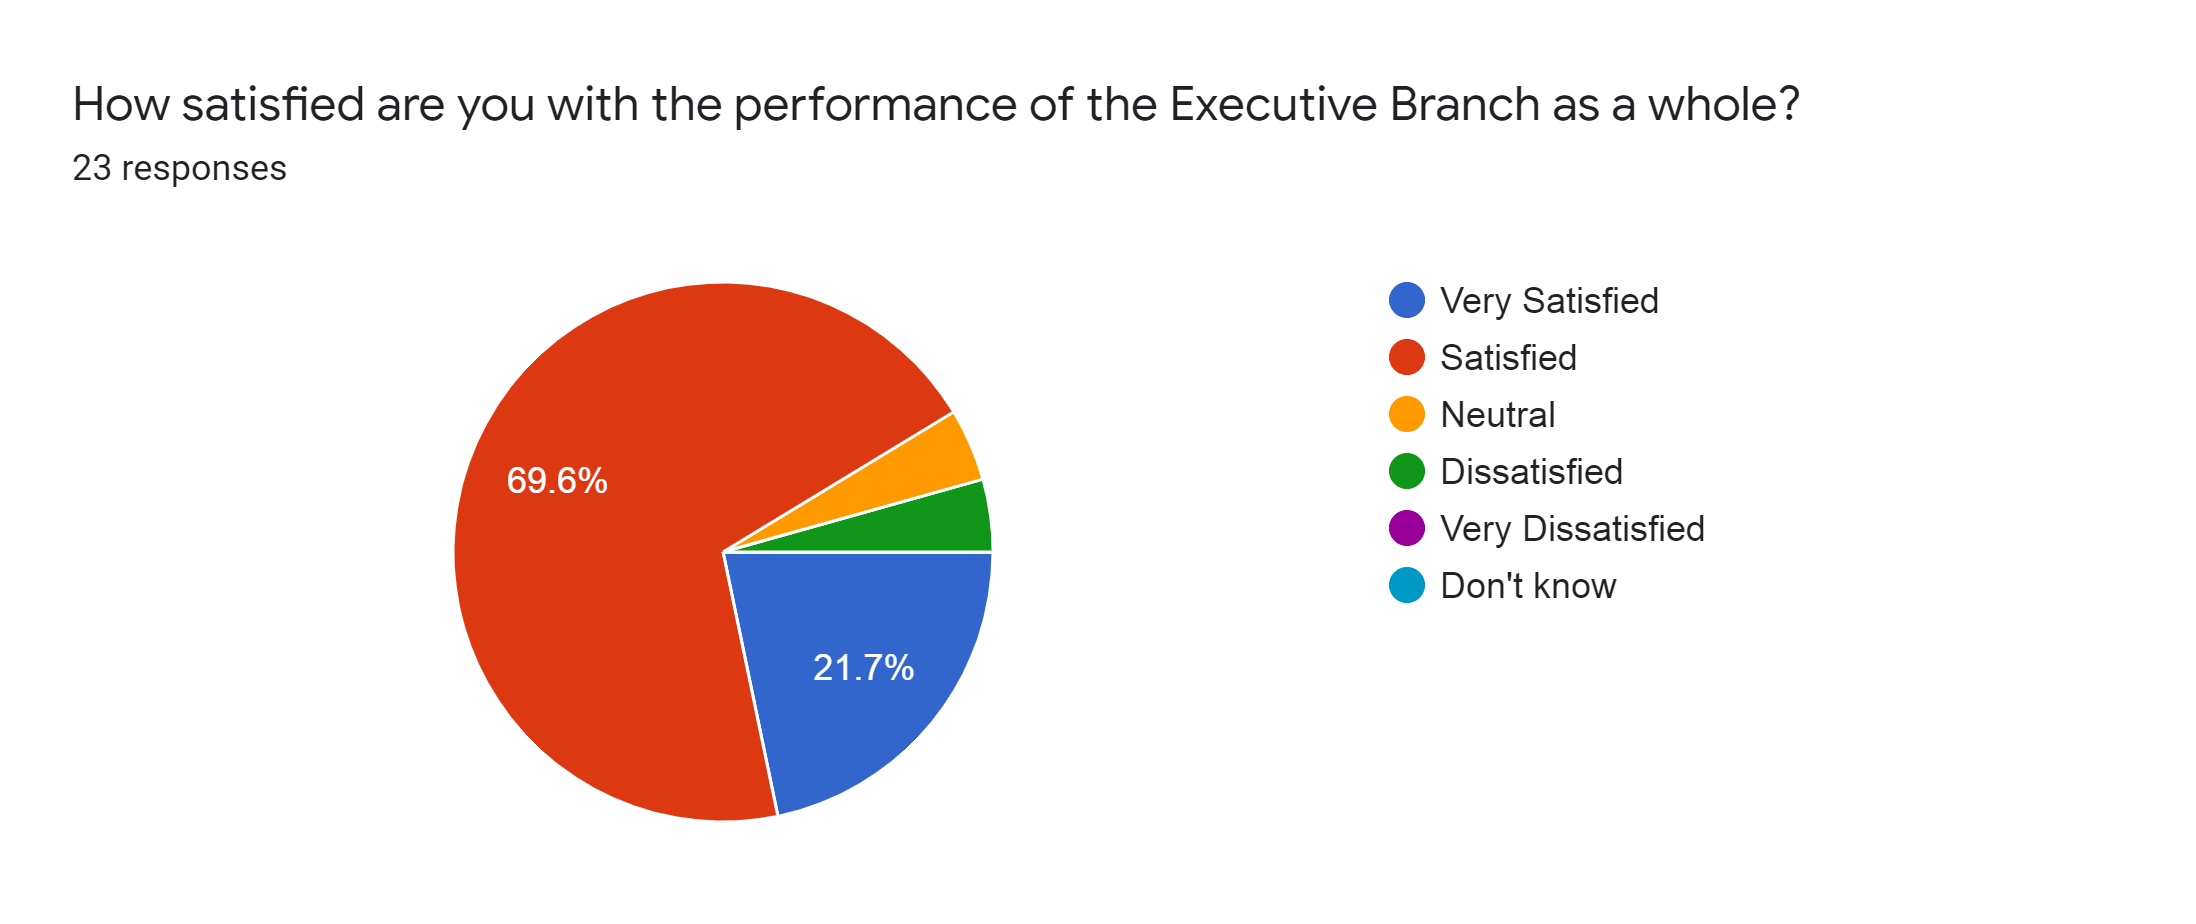 Forms response chart. Question title: How satisfied are you with the performance of the Executive Branch as a whole?. Number of responses: 23 responses.